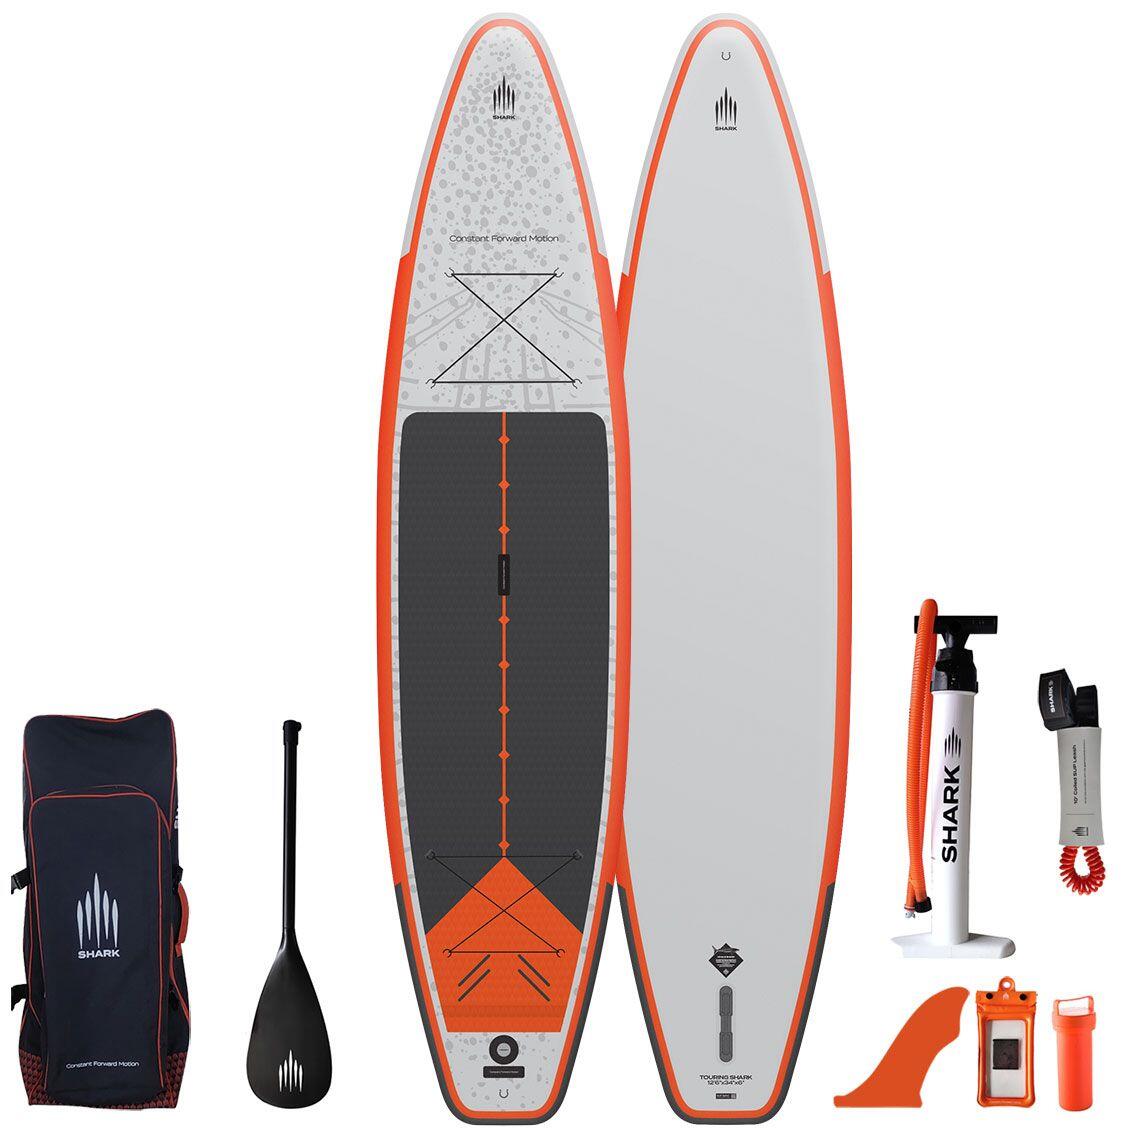 SHARK TOURING 12'6 x 32" x 6" FOR RIDERS WANTING GLIDE AND STABILTY 1/4